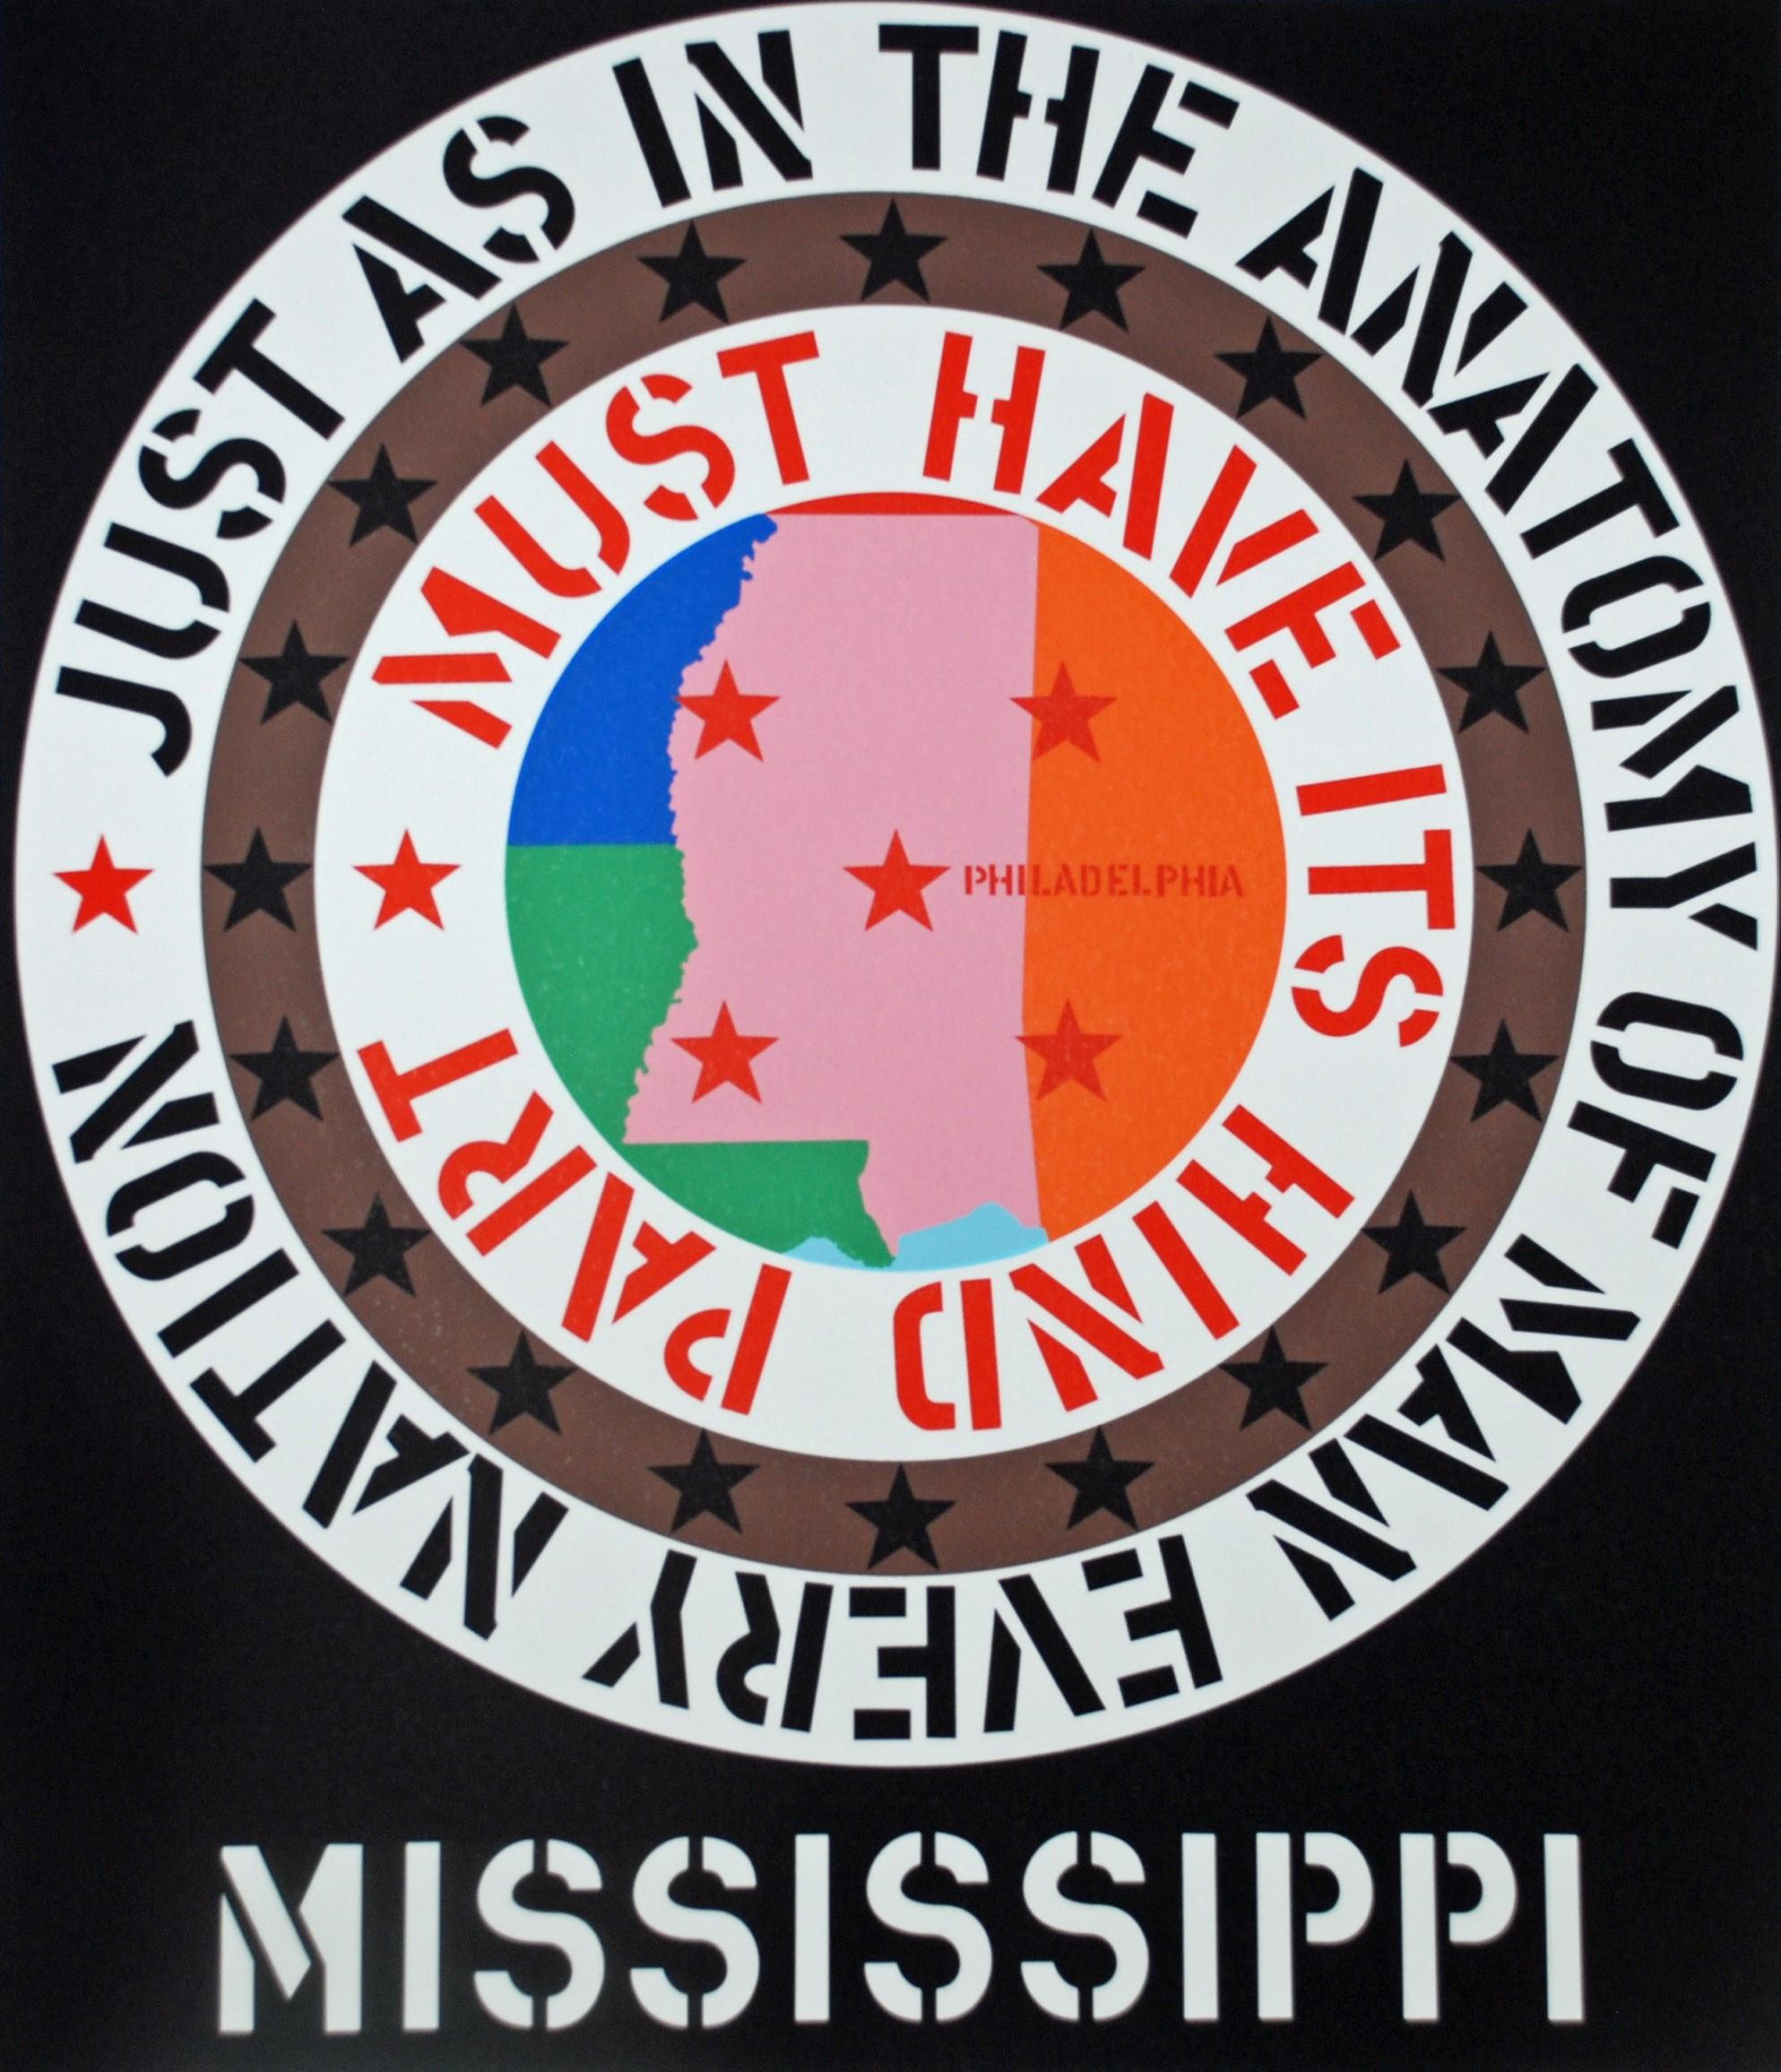 Mississippi - Print by Robert Indiana